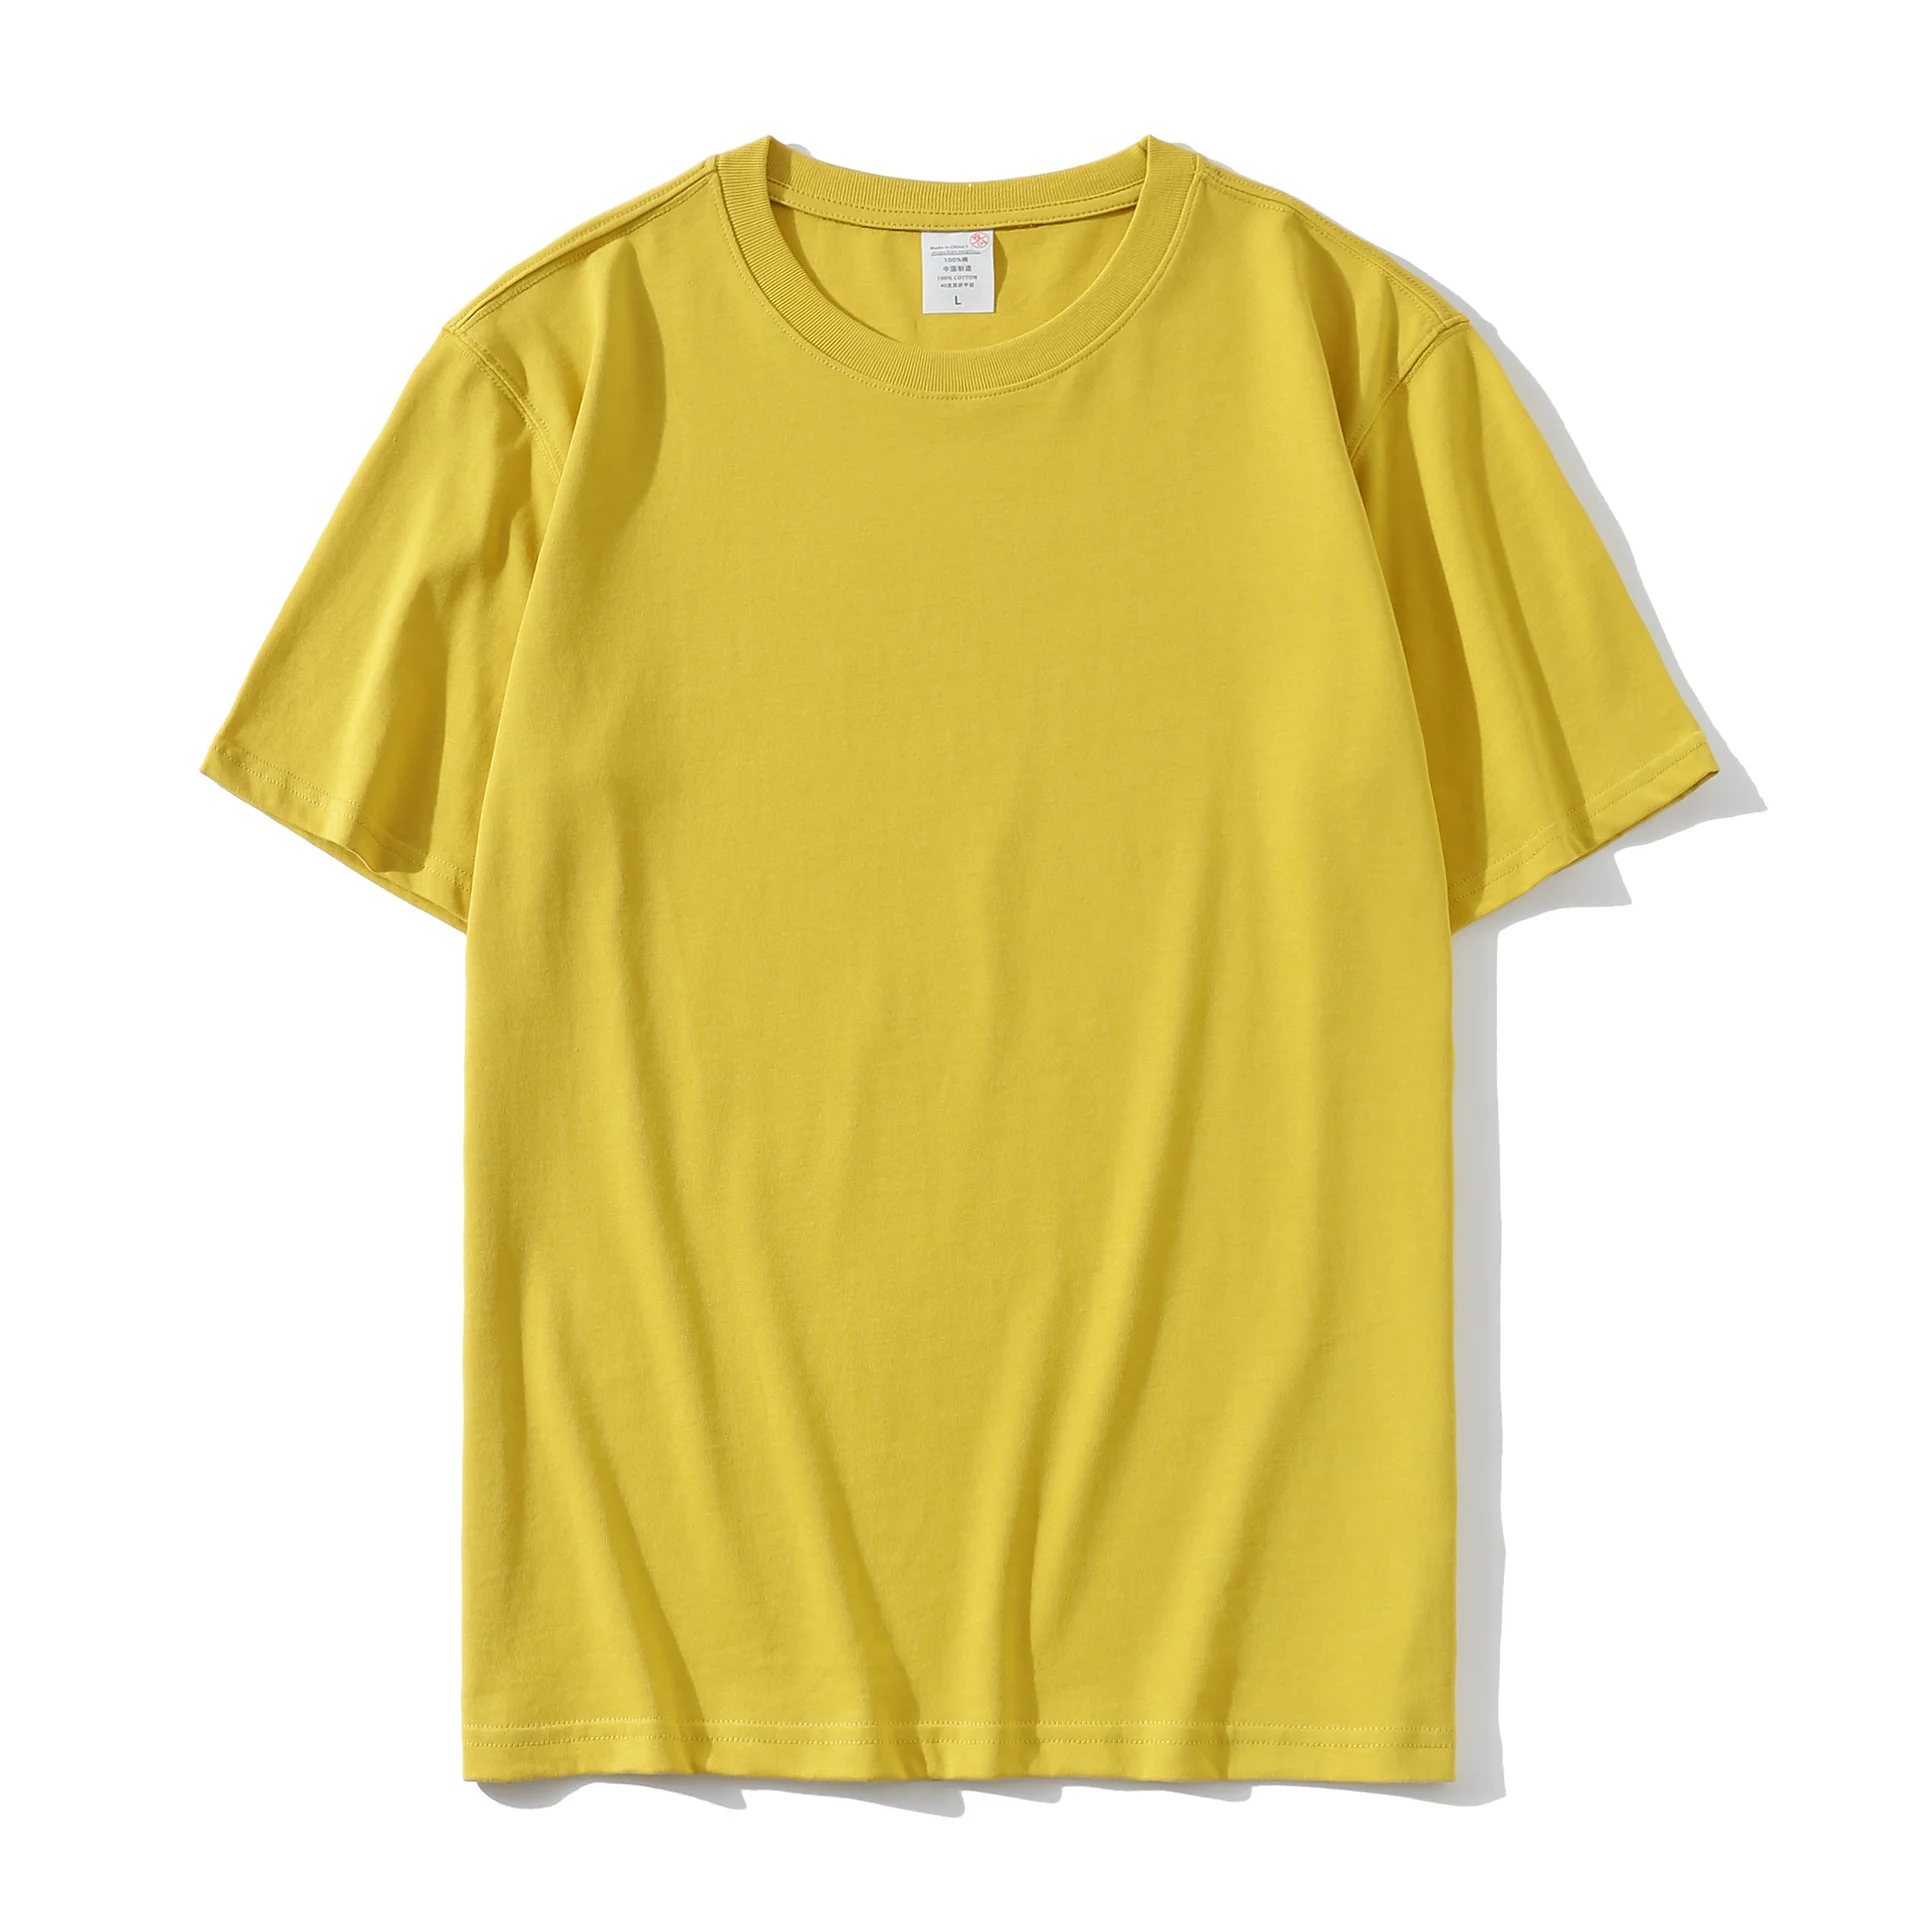 Wholesale Blank T shirts for Printing in Coventry